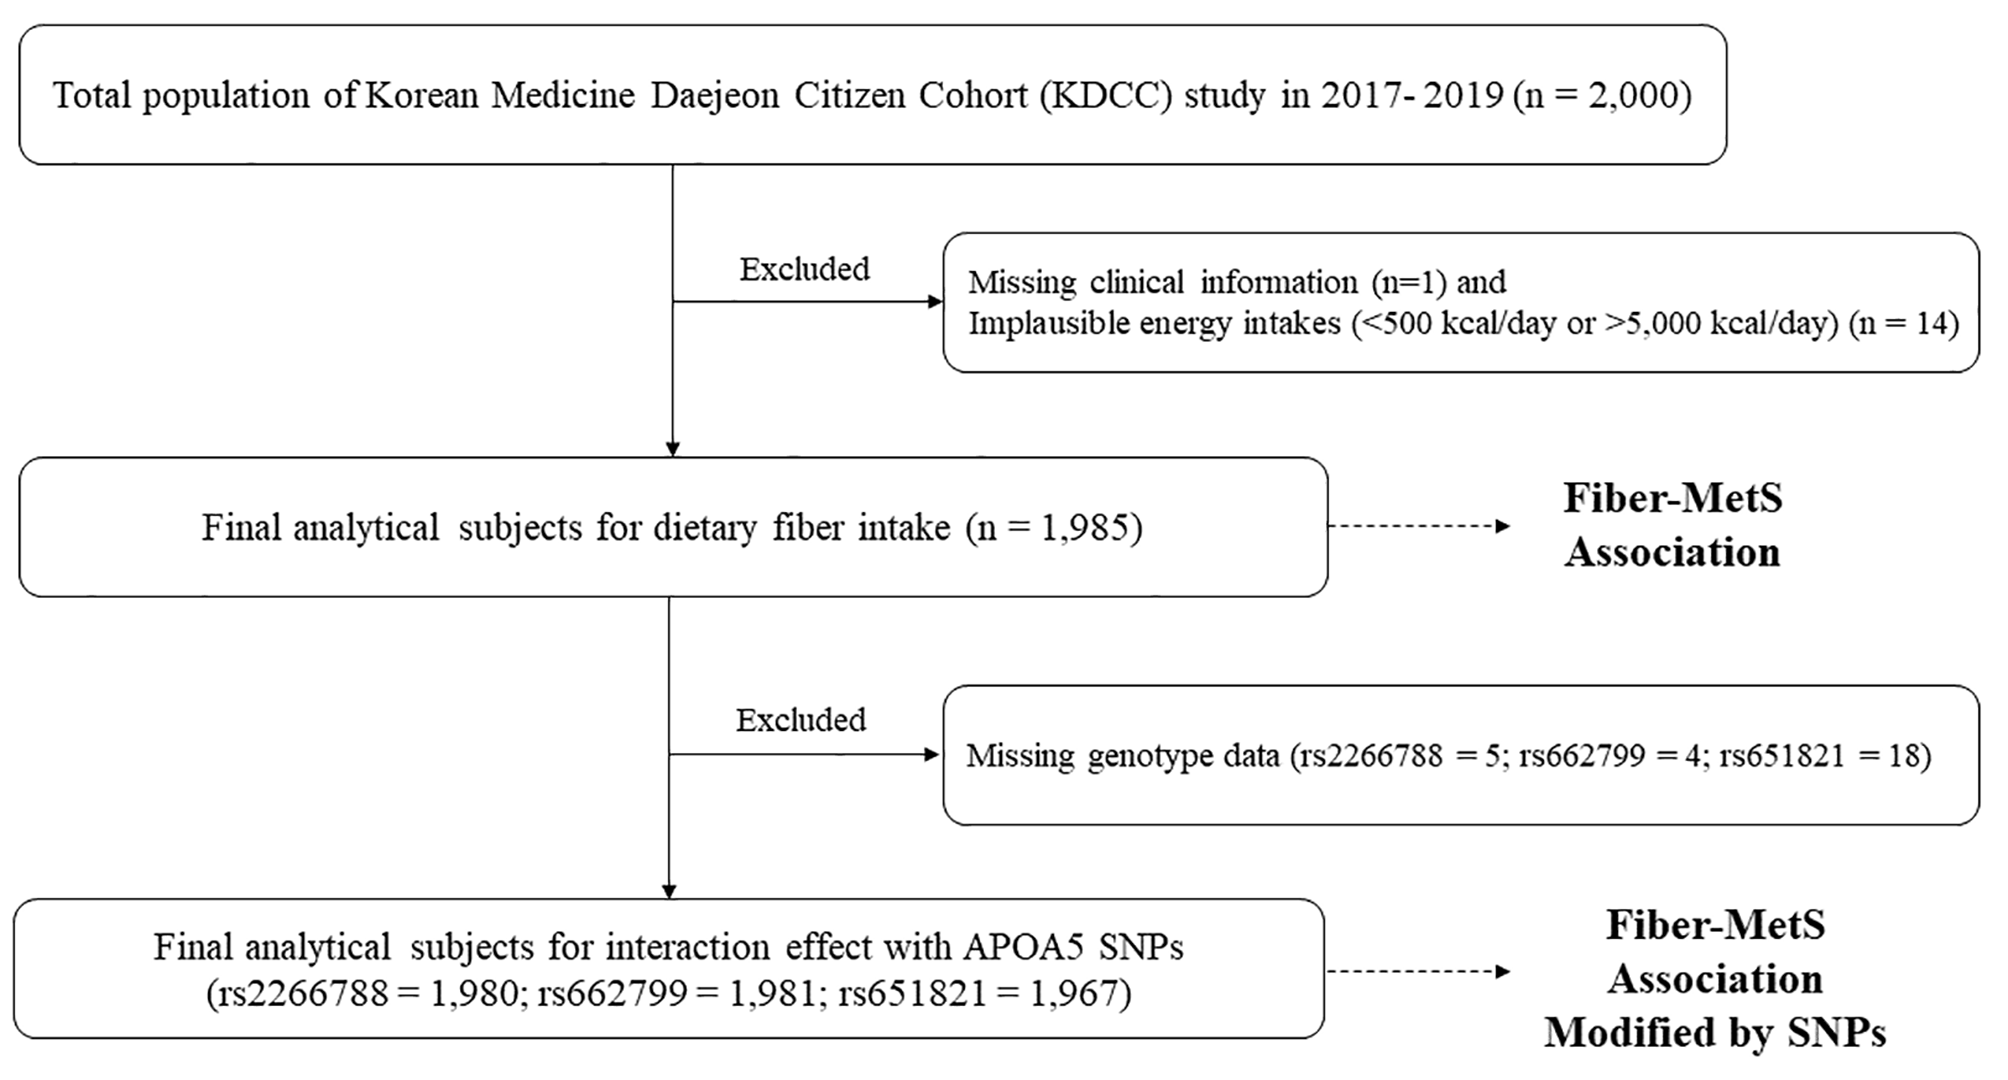 Consumption of dietary fiber and APOA5 genetic variants in metabolic syndrome: baseline data from the Korean Medicine Daejeon Citizen Cohort Study